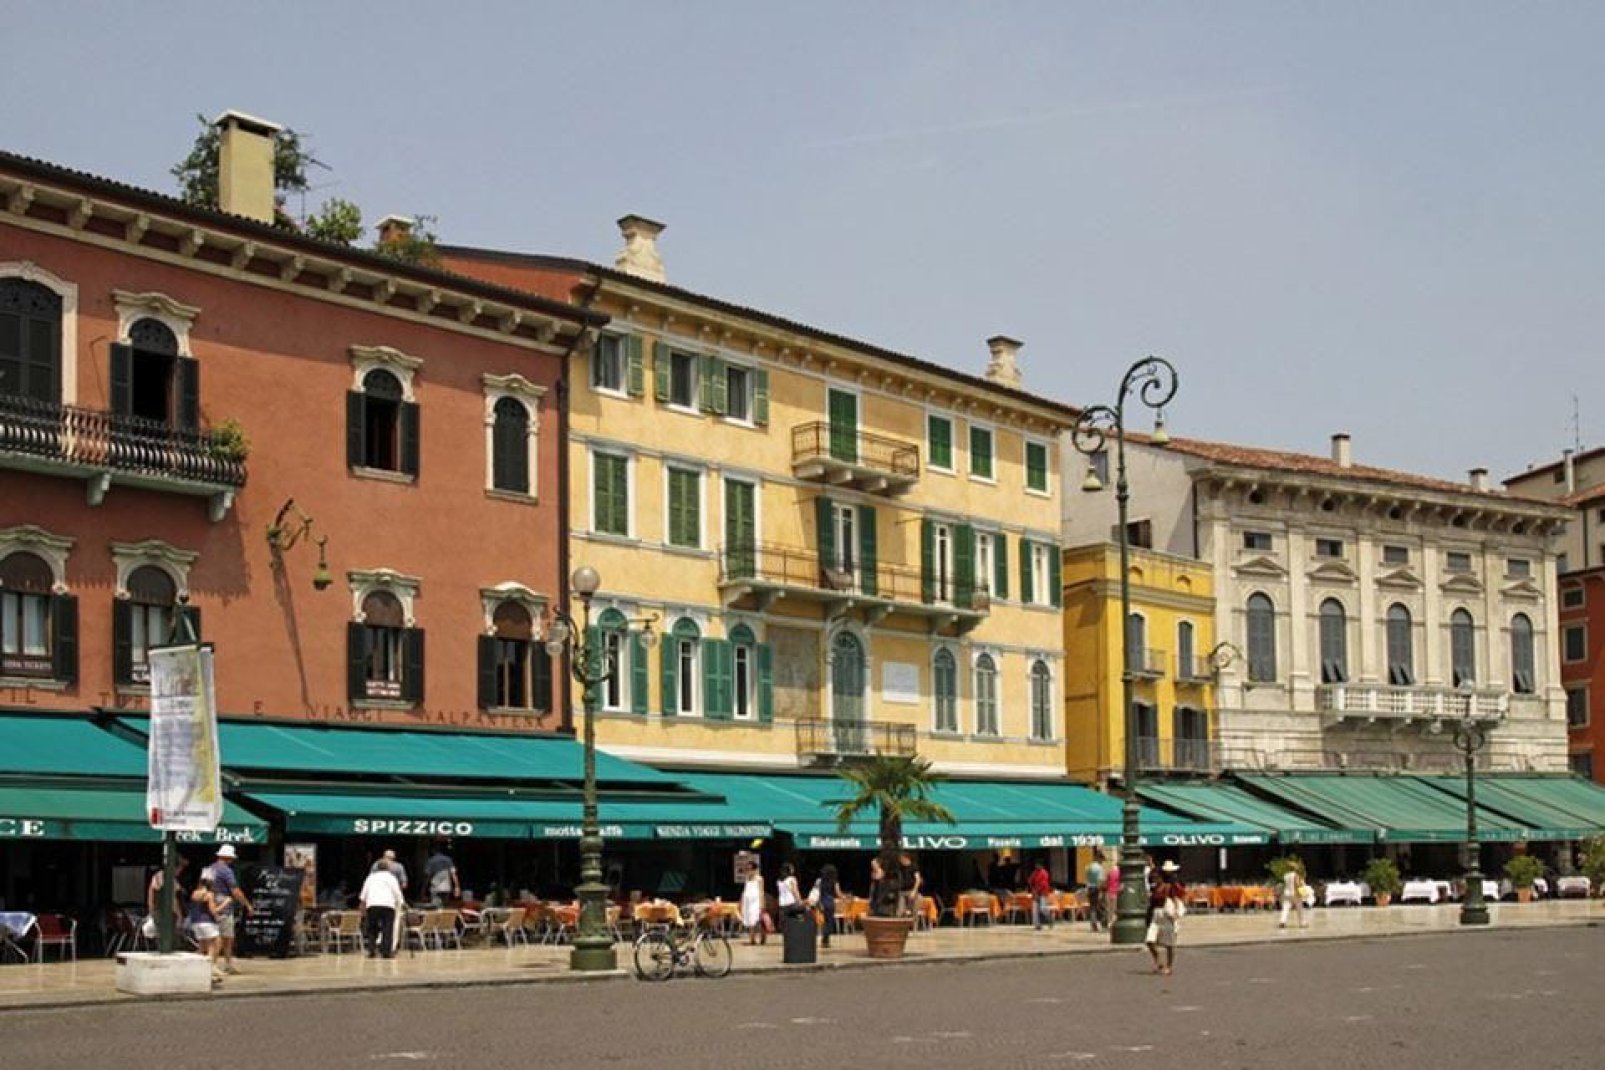 The biggest square in Verona is found in the historical centre of town.